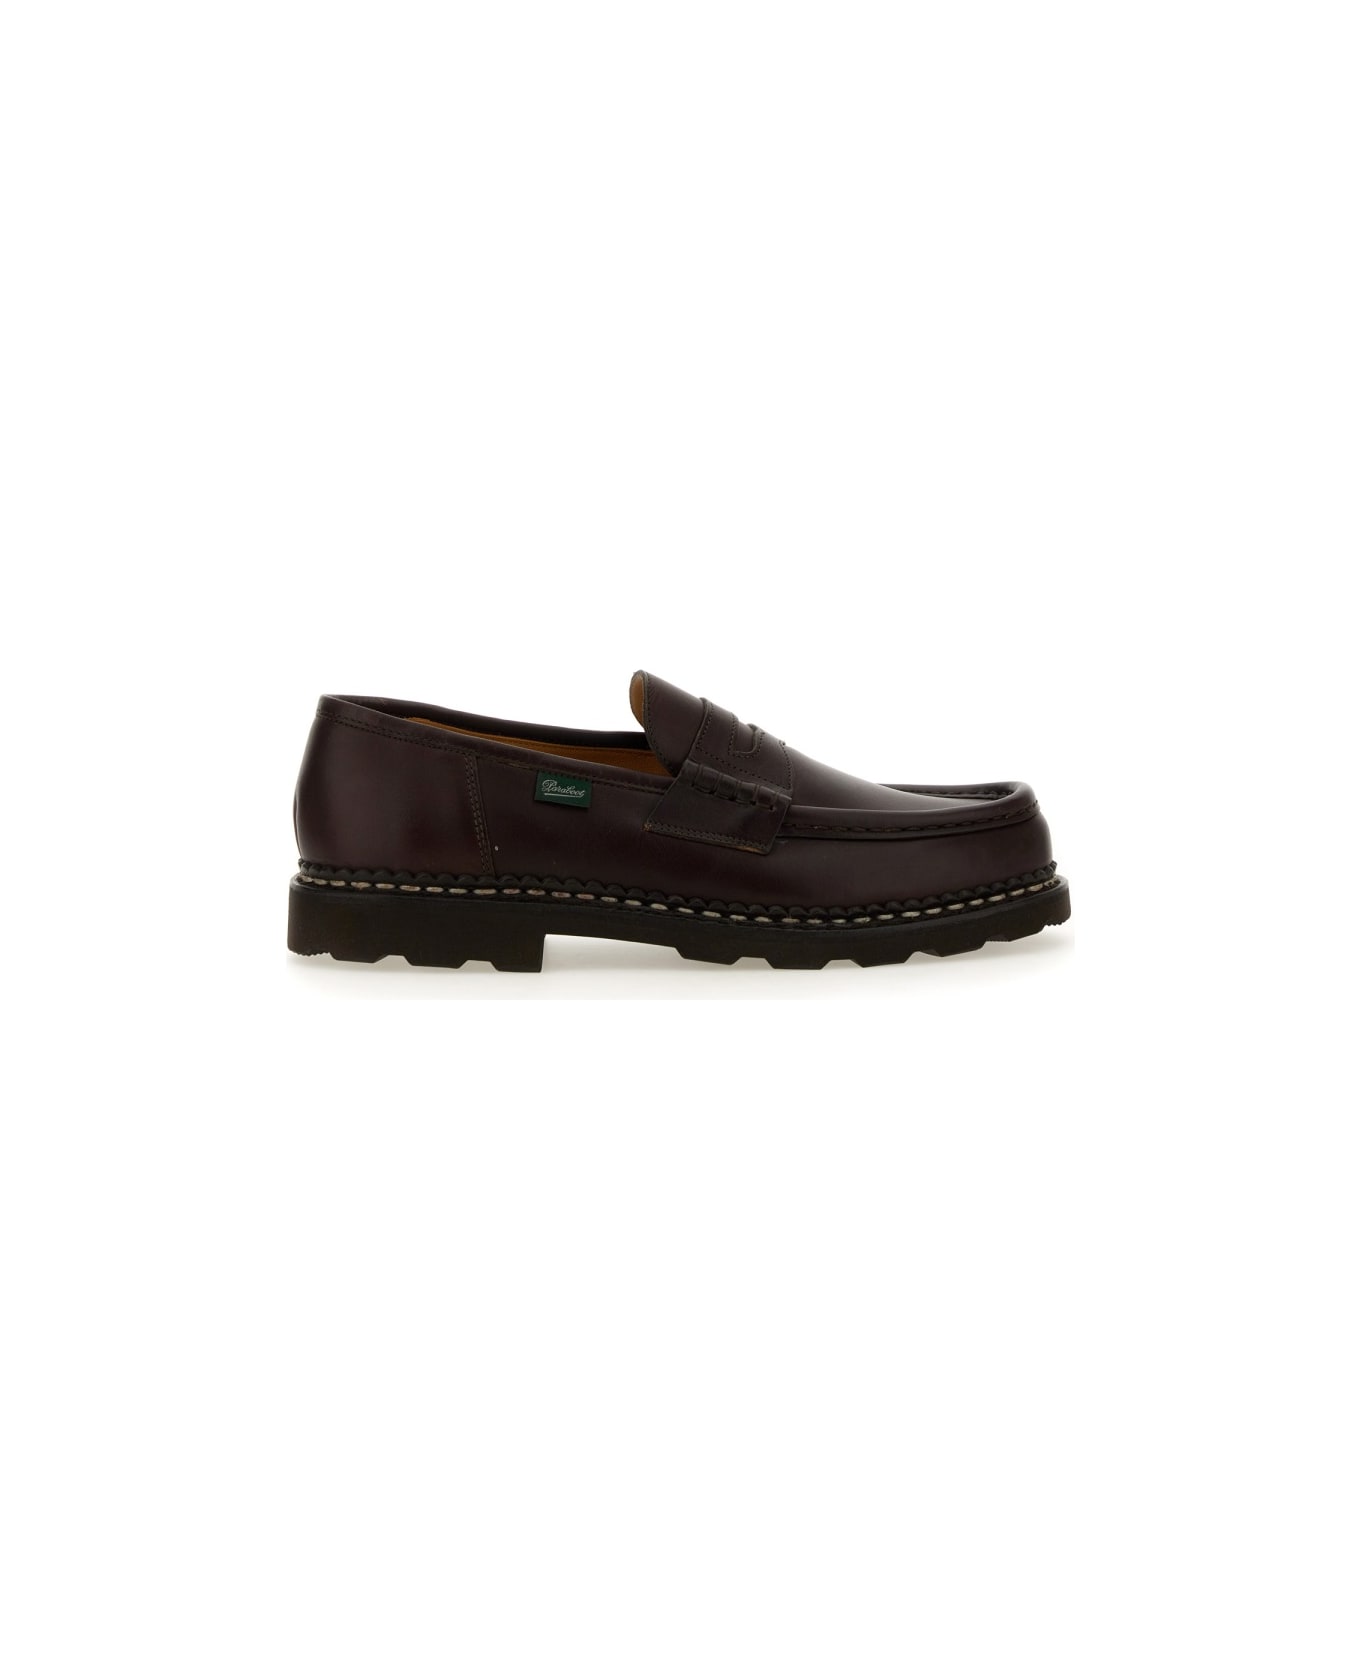 Paraboot Moccasin Reims - BROWN